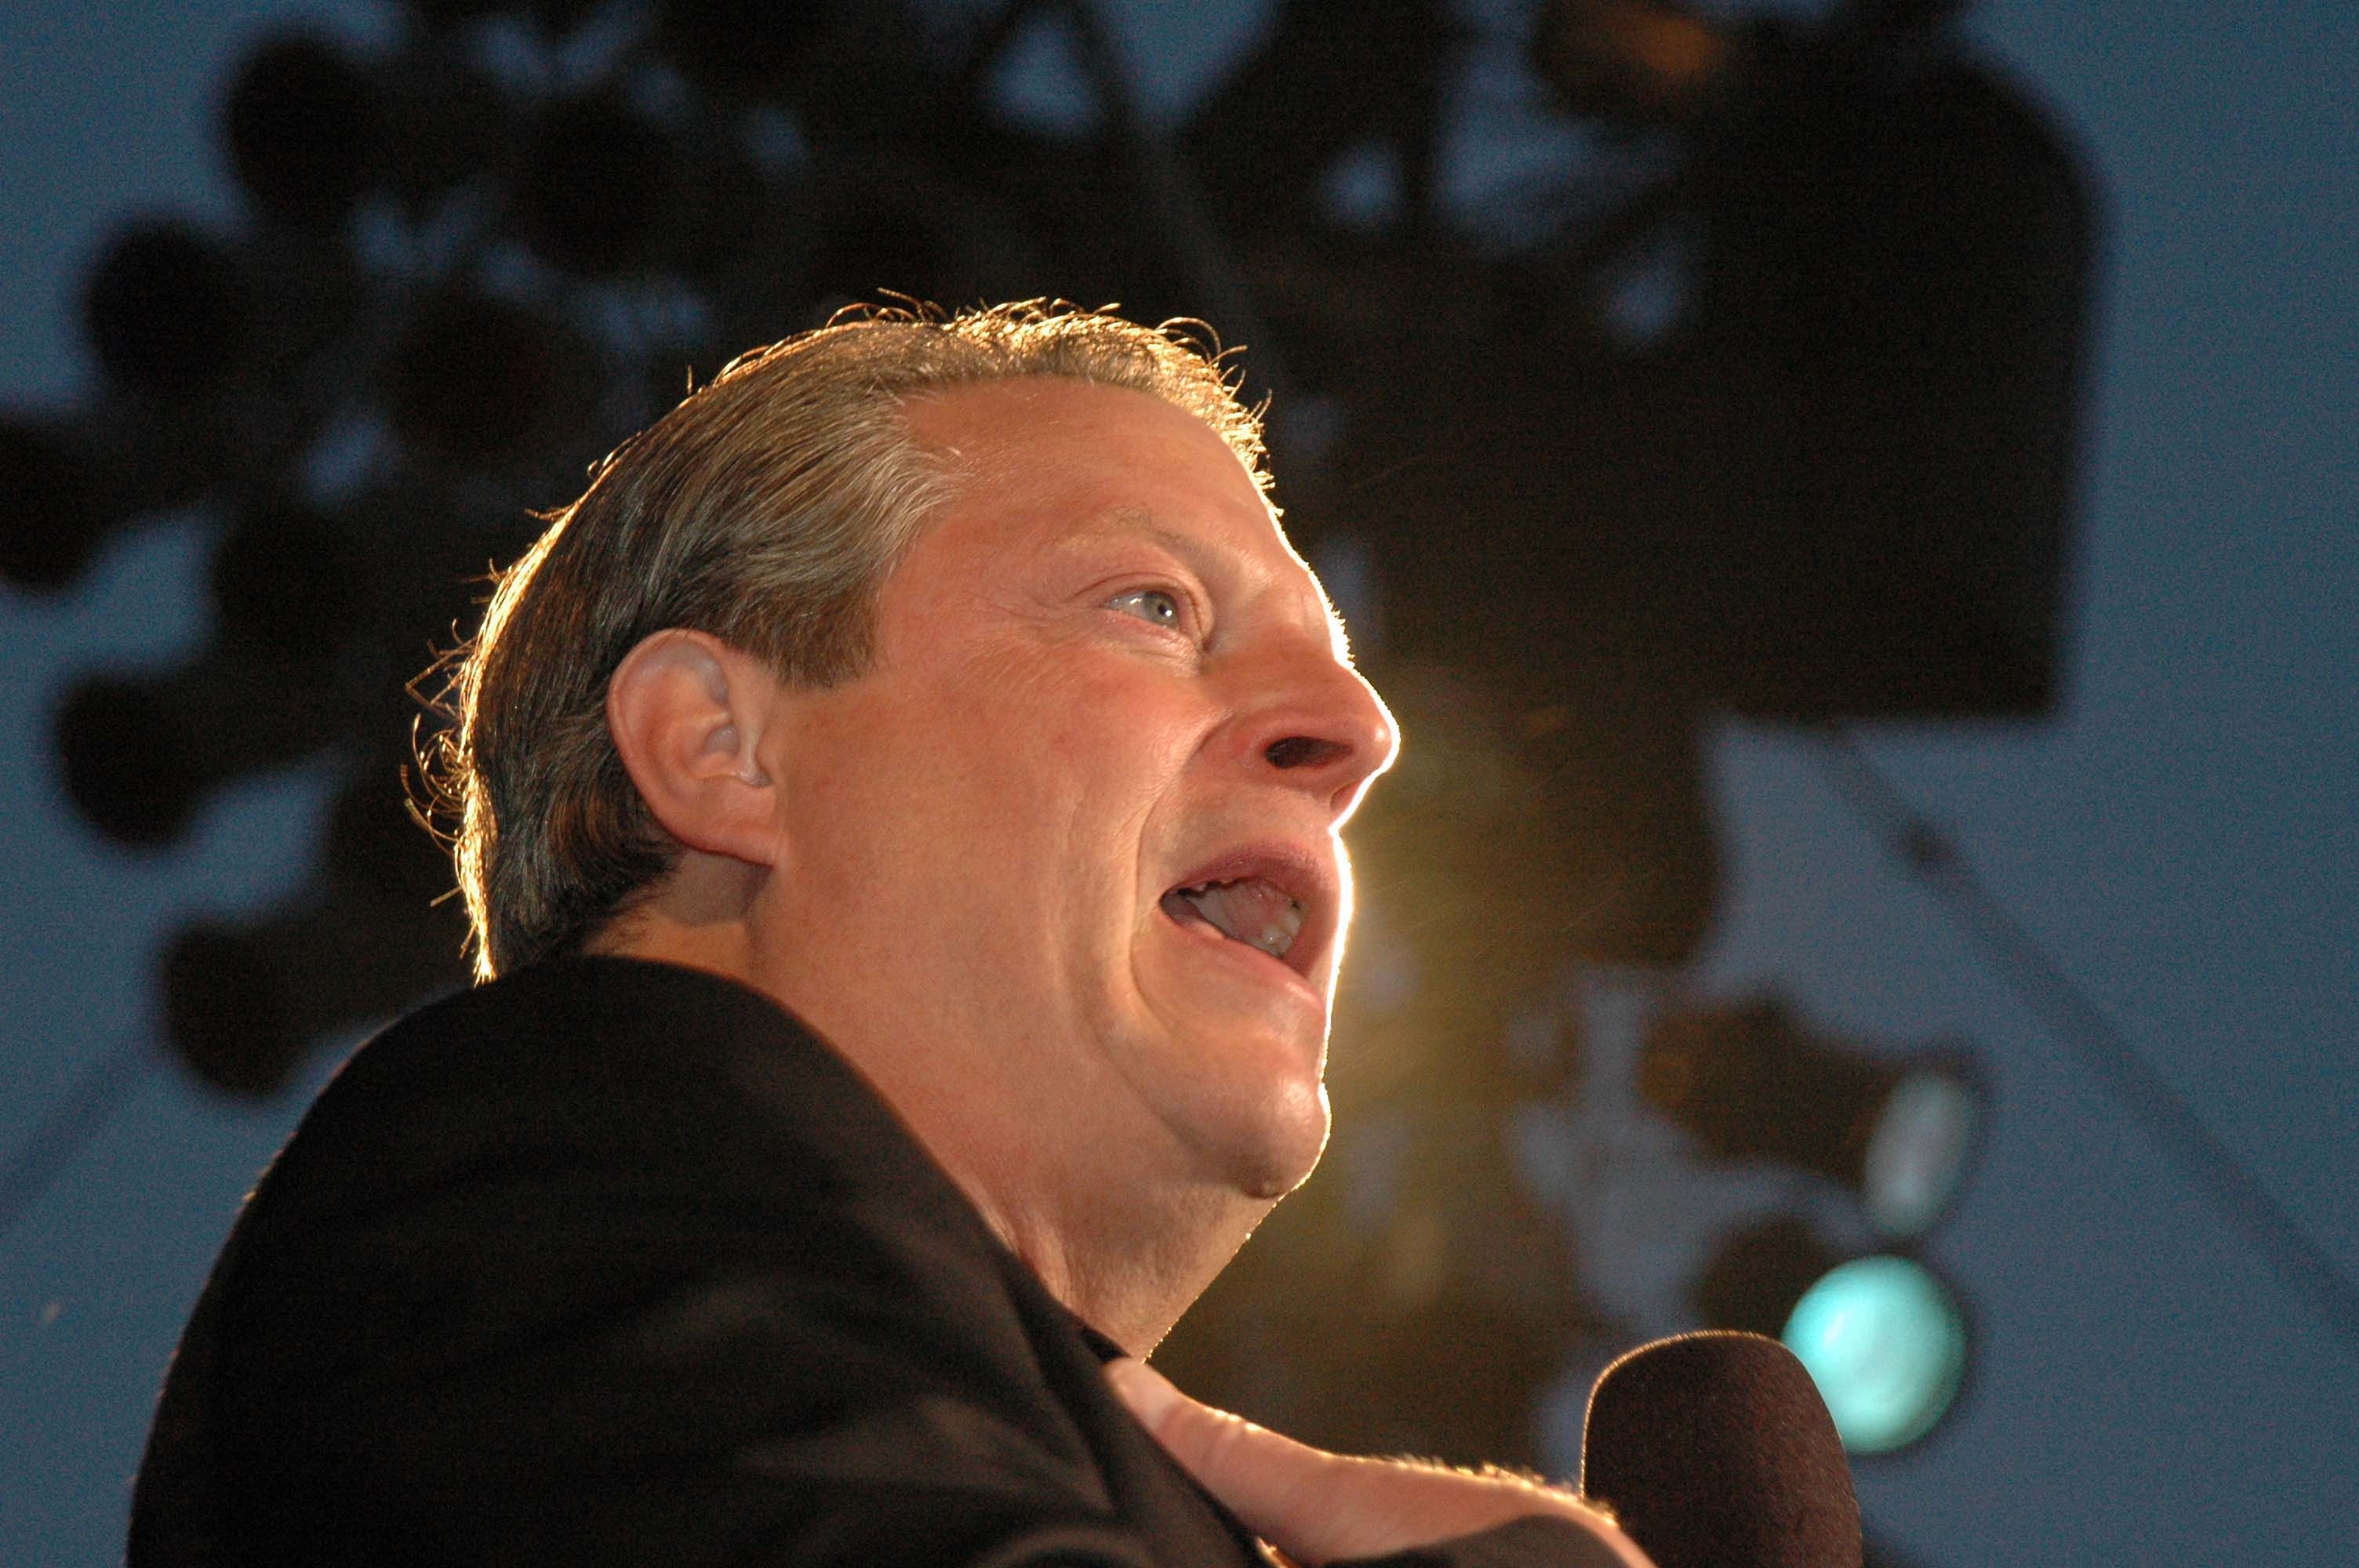 Al Gore at a Special Outdoor Screening of "An Inconvenient Truth". Grand Performances, Los Angeles, CA. 06-24-06